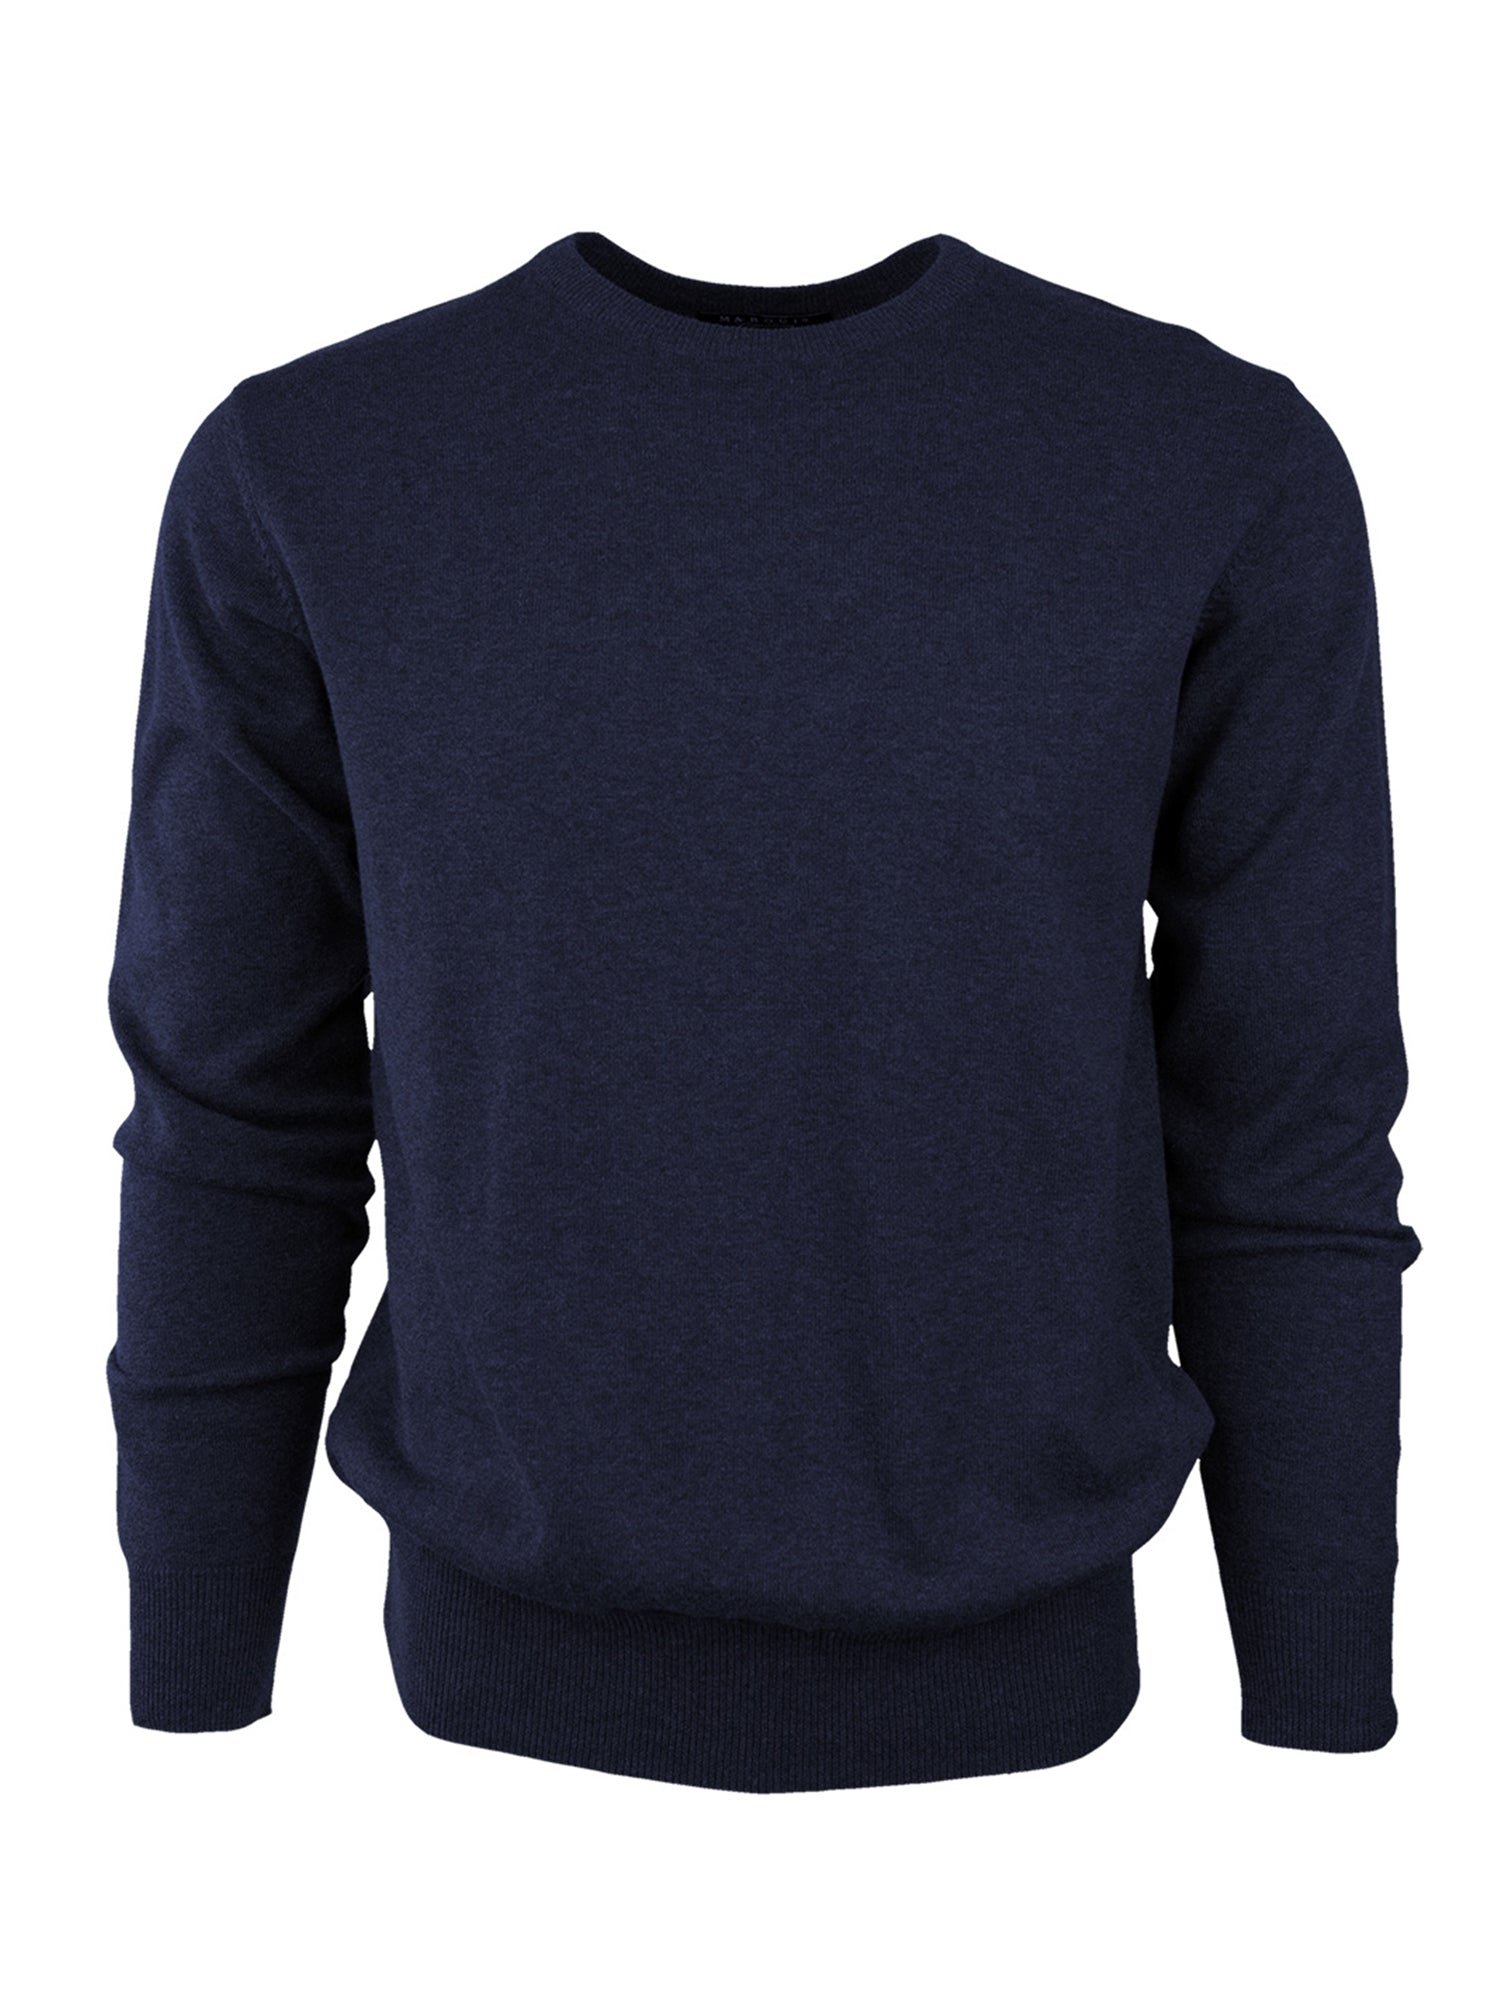 Marquis Solid Crew Neck Cotton Sweater For Men Sweater Marquis Navy Small 